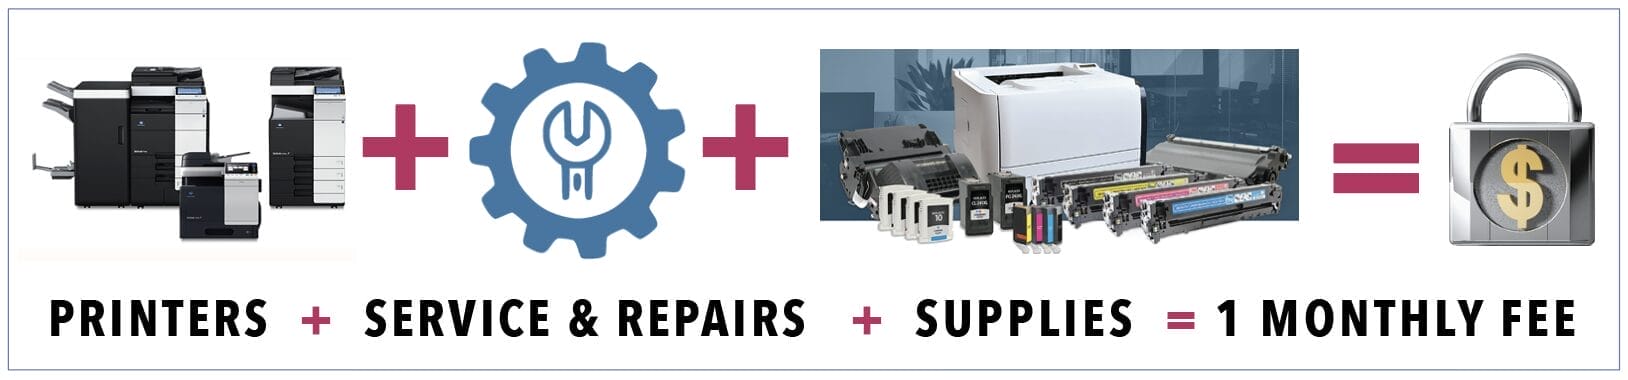 infographic illustrating what is included in managed print service: printers plus service and repairs plus supplies = one monthly invoice